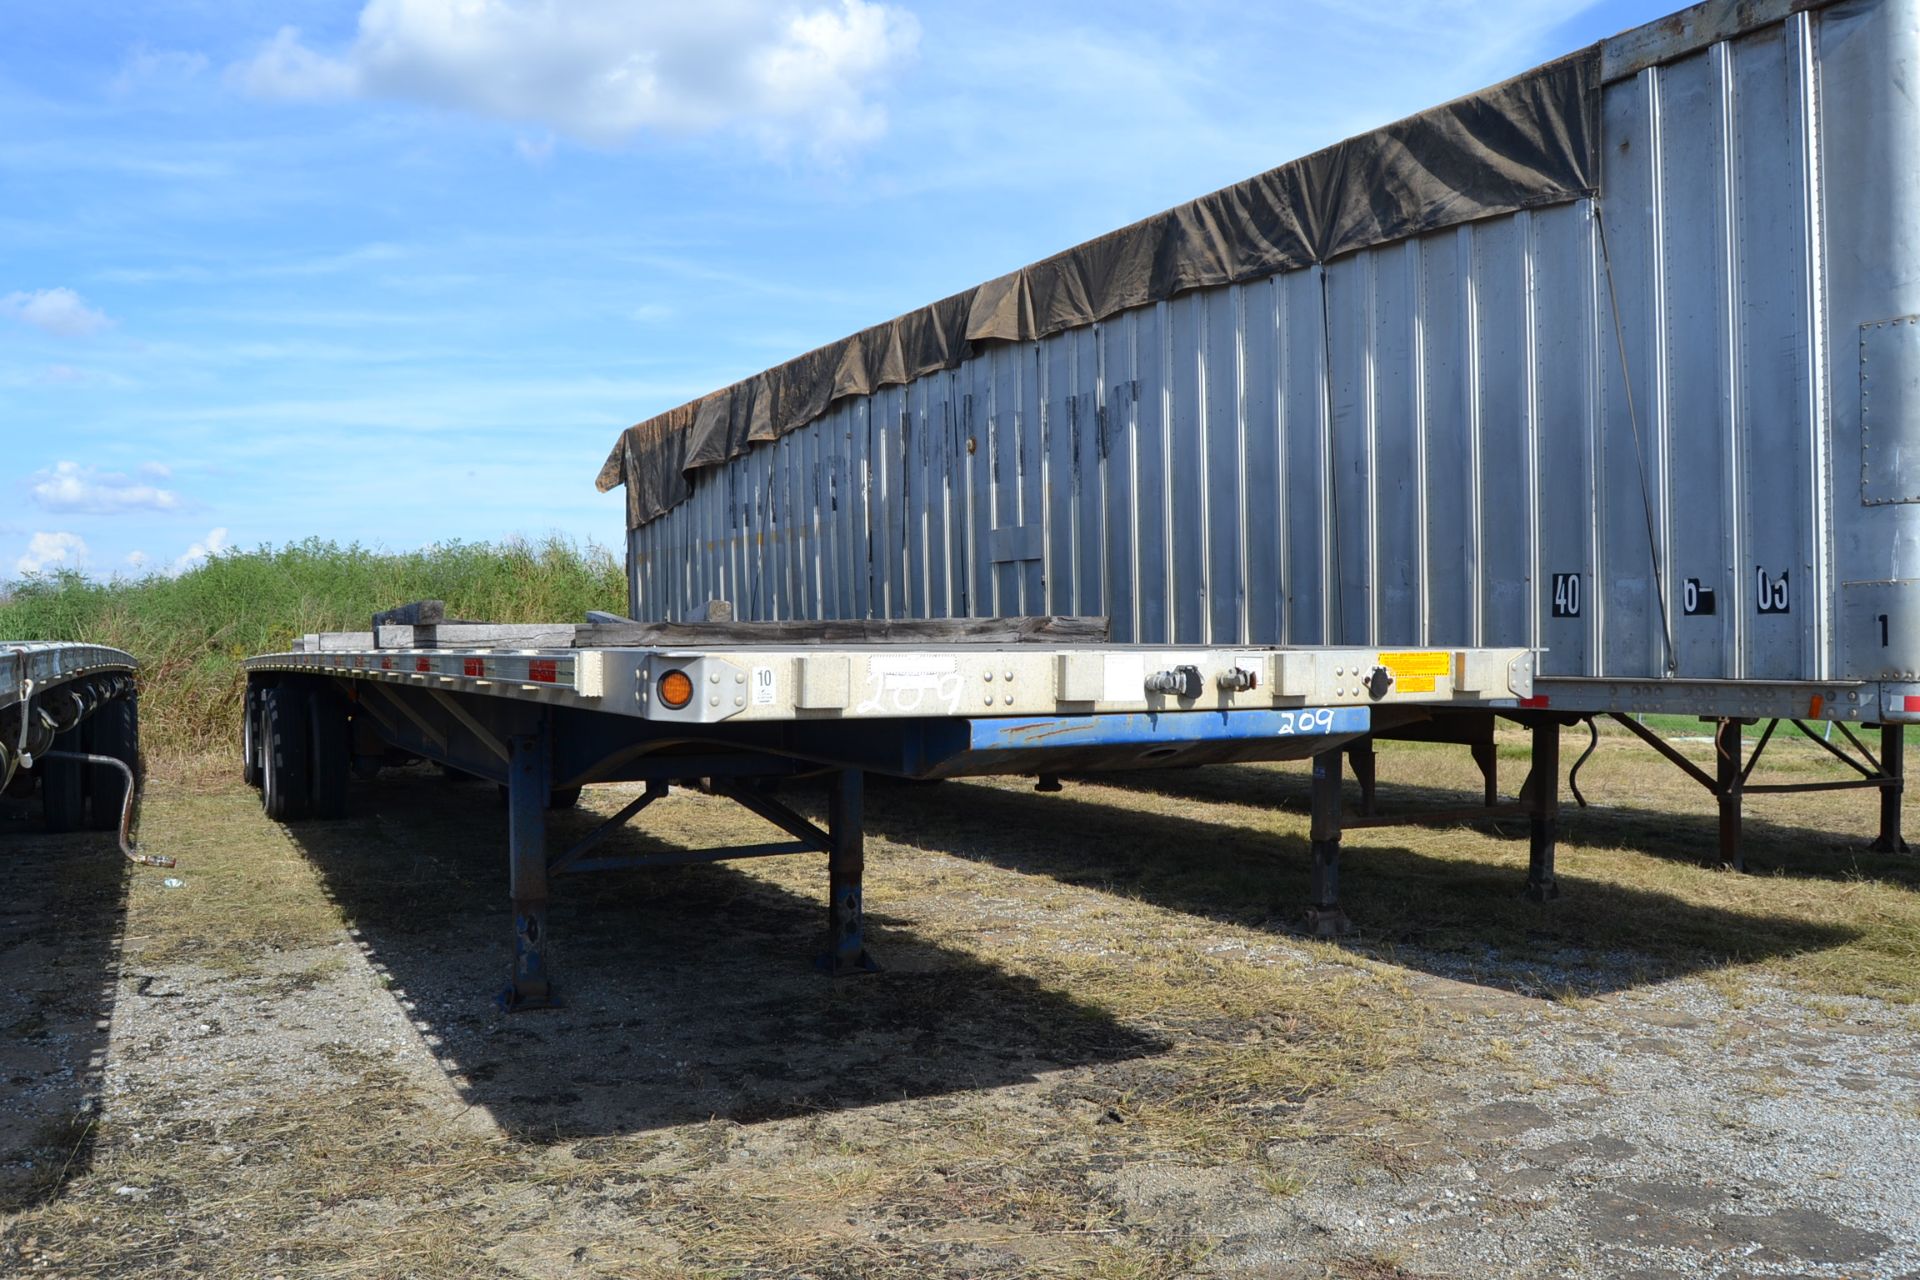 2003 UTILITY 48' SREAD AXLE FLATBED TRAILER - Image 3 of 3